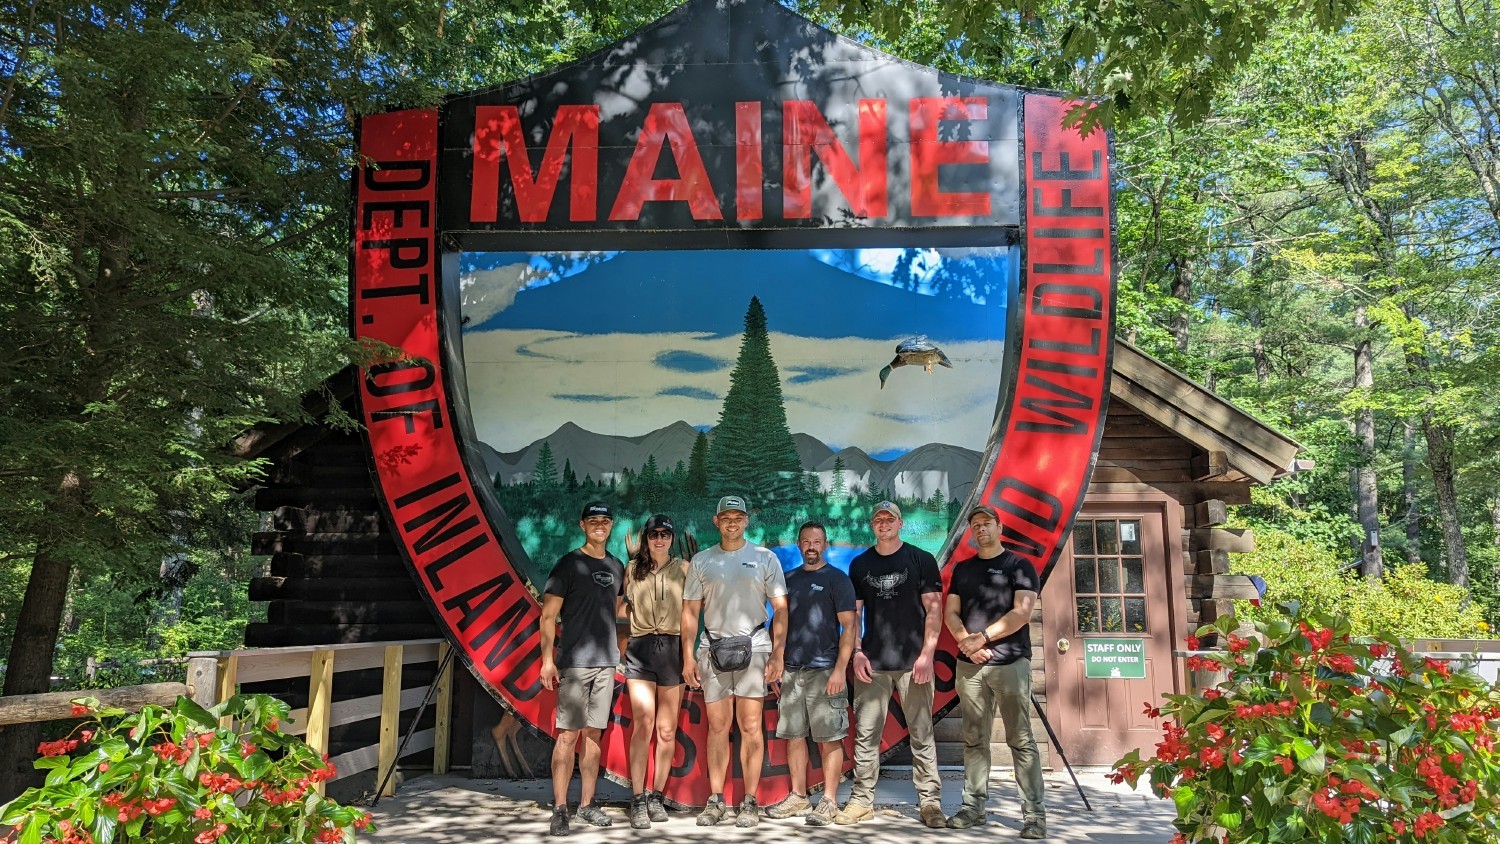 EMPLOYEES VOLUNTEERING AT MAINE WILELIFE PARK